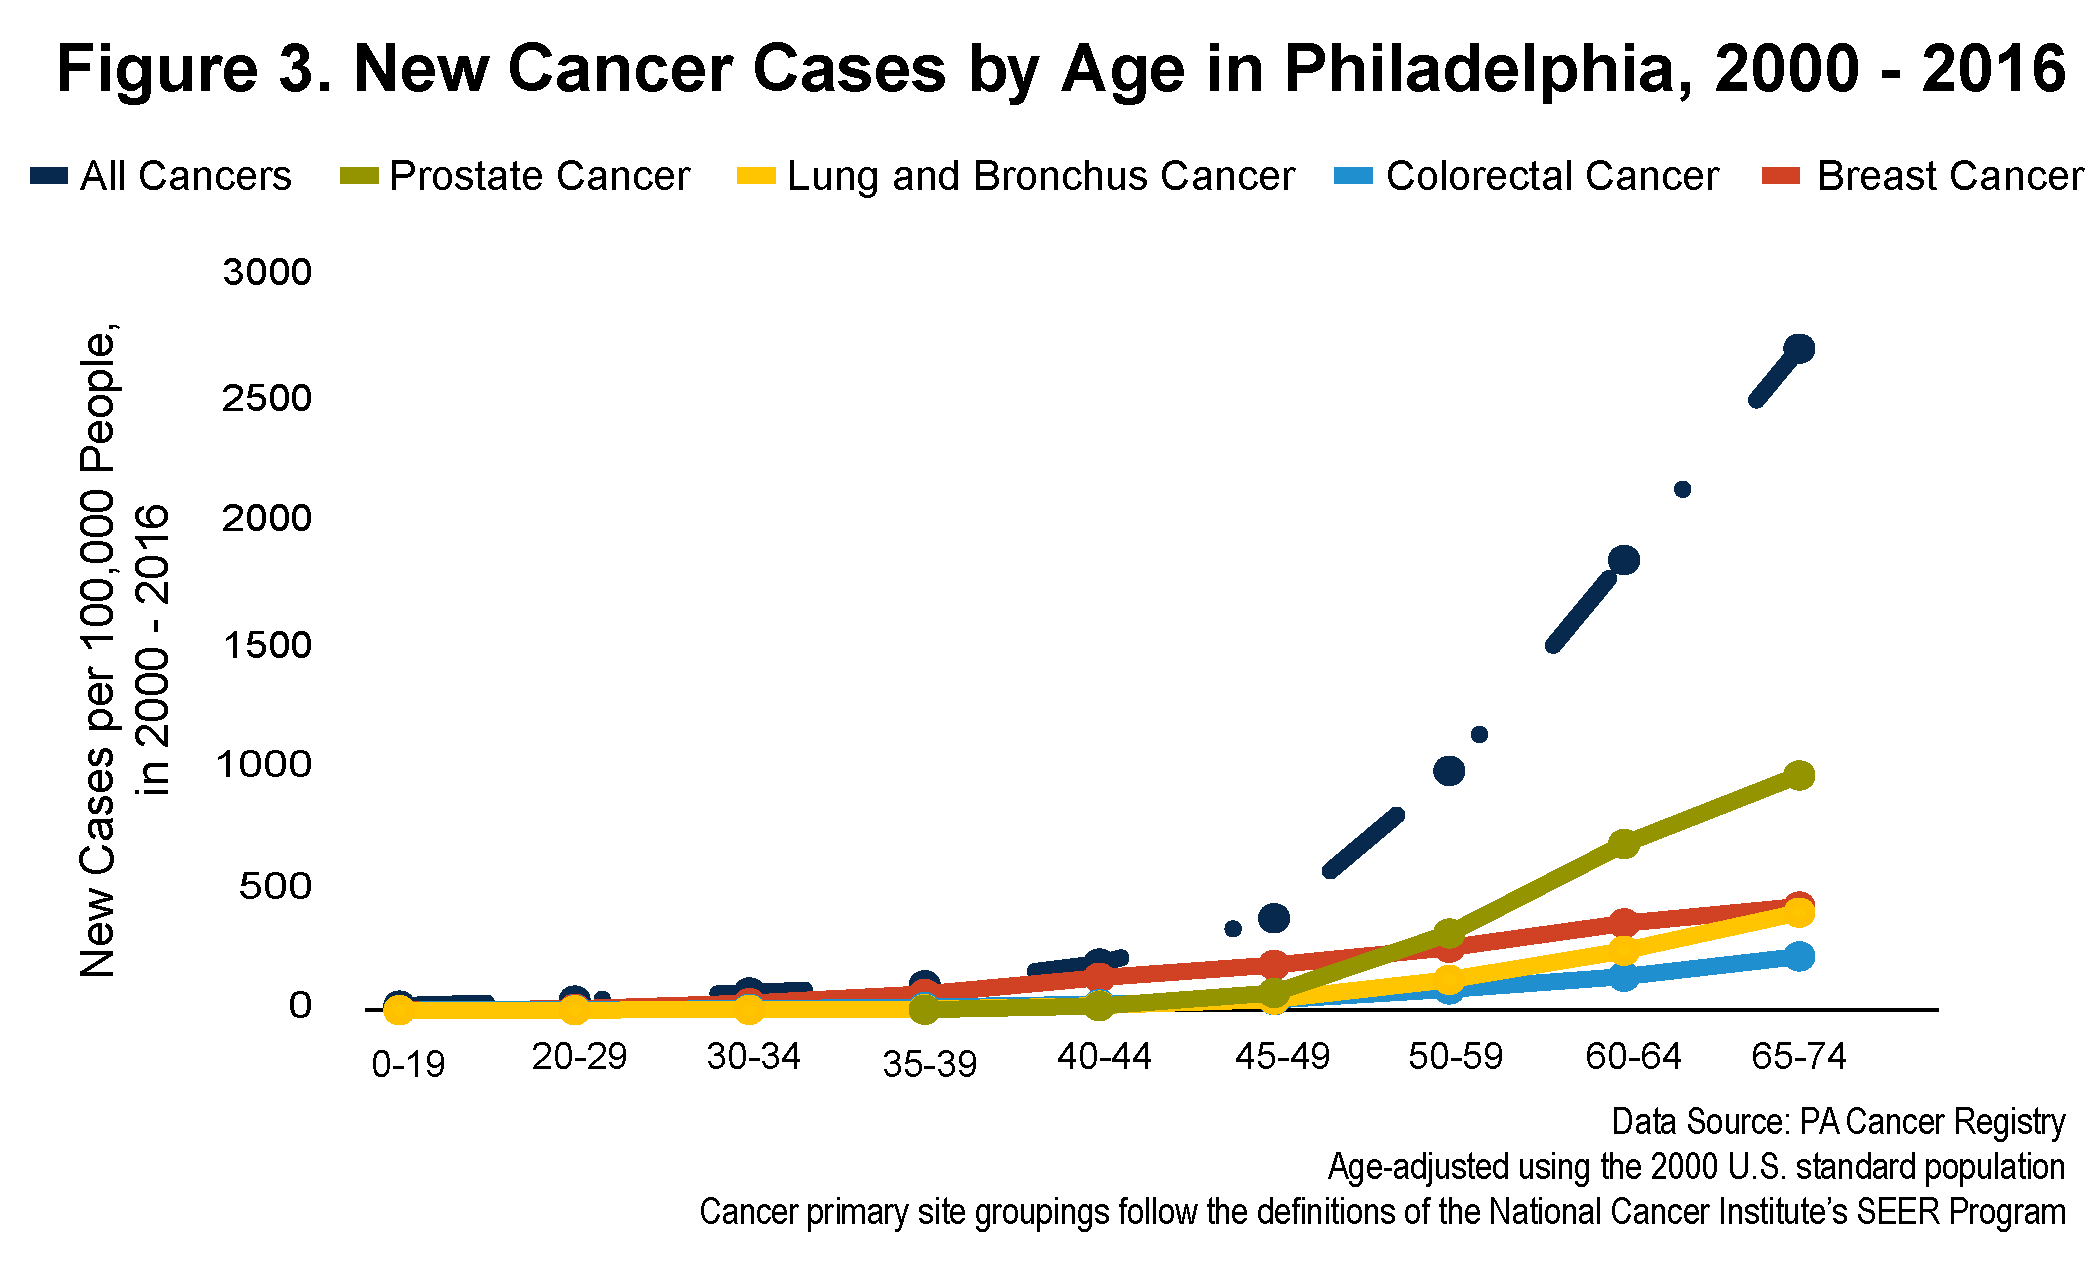 Figure 3. New Cancer Cases by Age in Philadelphia, 2000-2016